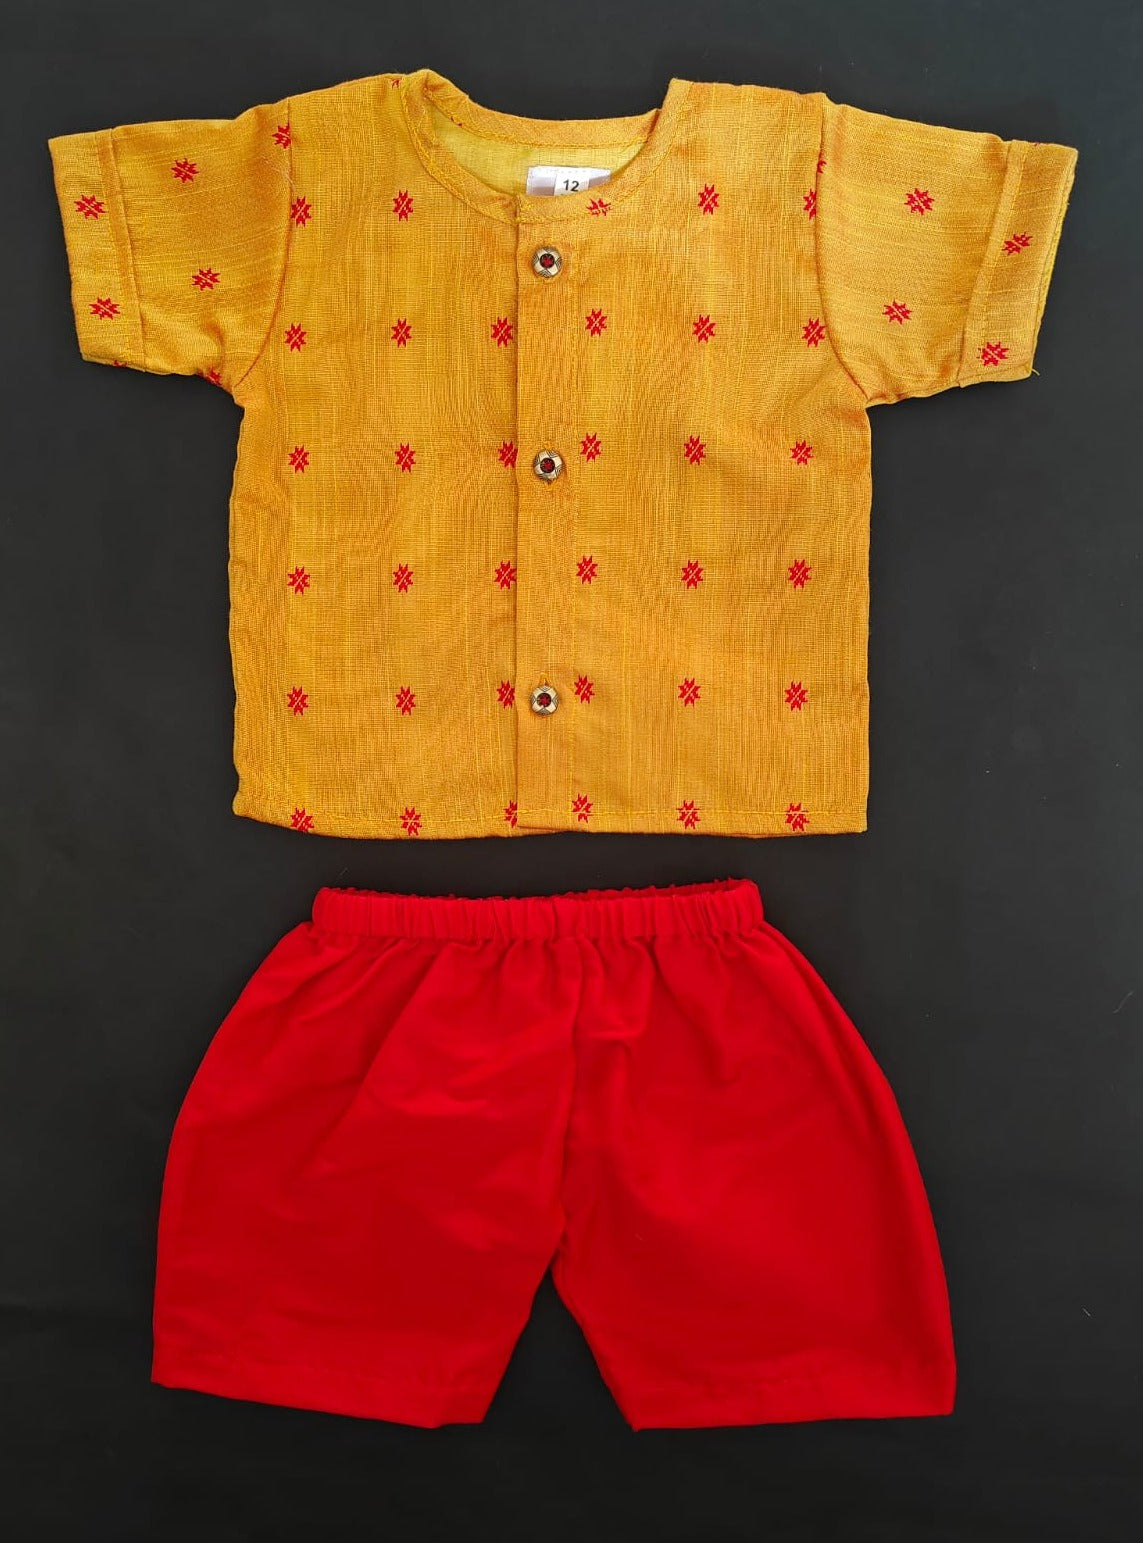 Turmeric yellow and red  raw silk Baba suit for newborn Baby Boy ideal for naming ceremony. It's the perfect outfit for your baby's naming ceremony,naamkaran,annaprashan ceremony.Traditional dress for Noolukettu Ceremony,Pachavi Puja,cradle ceremony,Rice Ceremony,Chatti Puja etc. Apt gifting idea